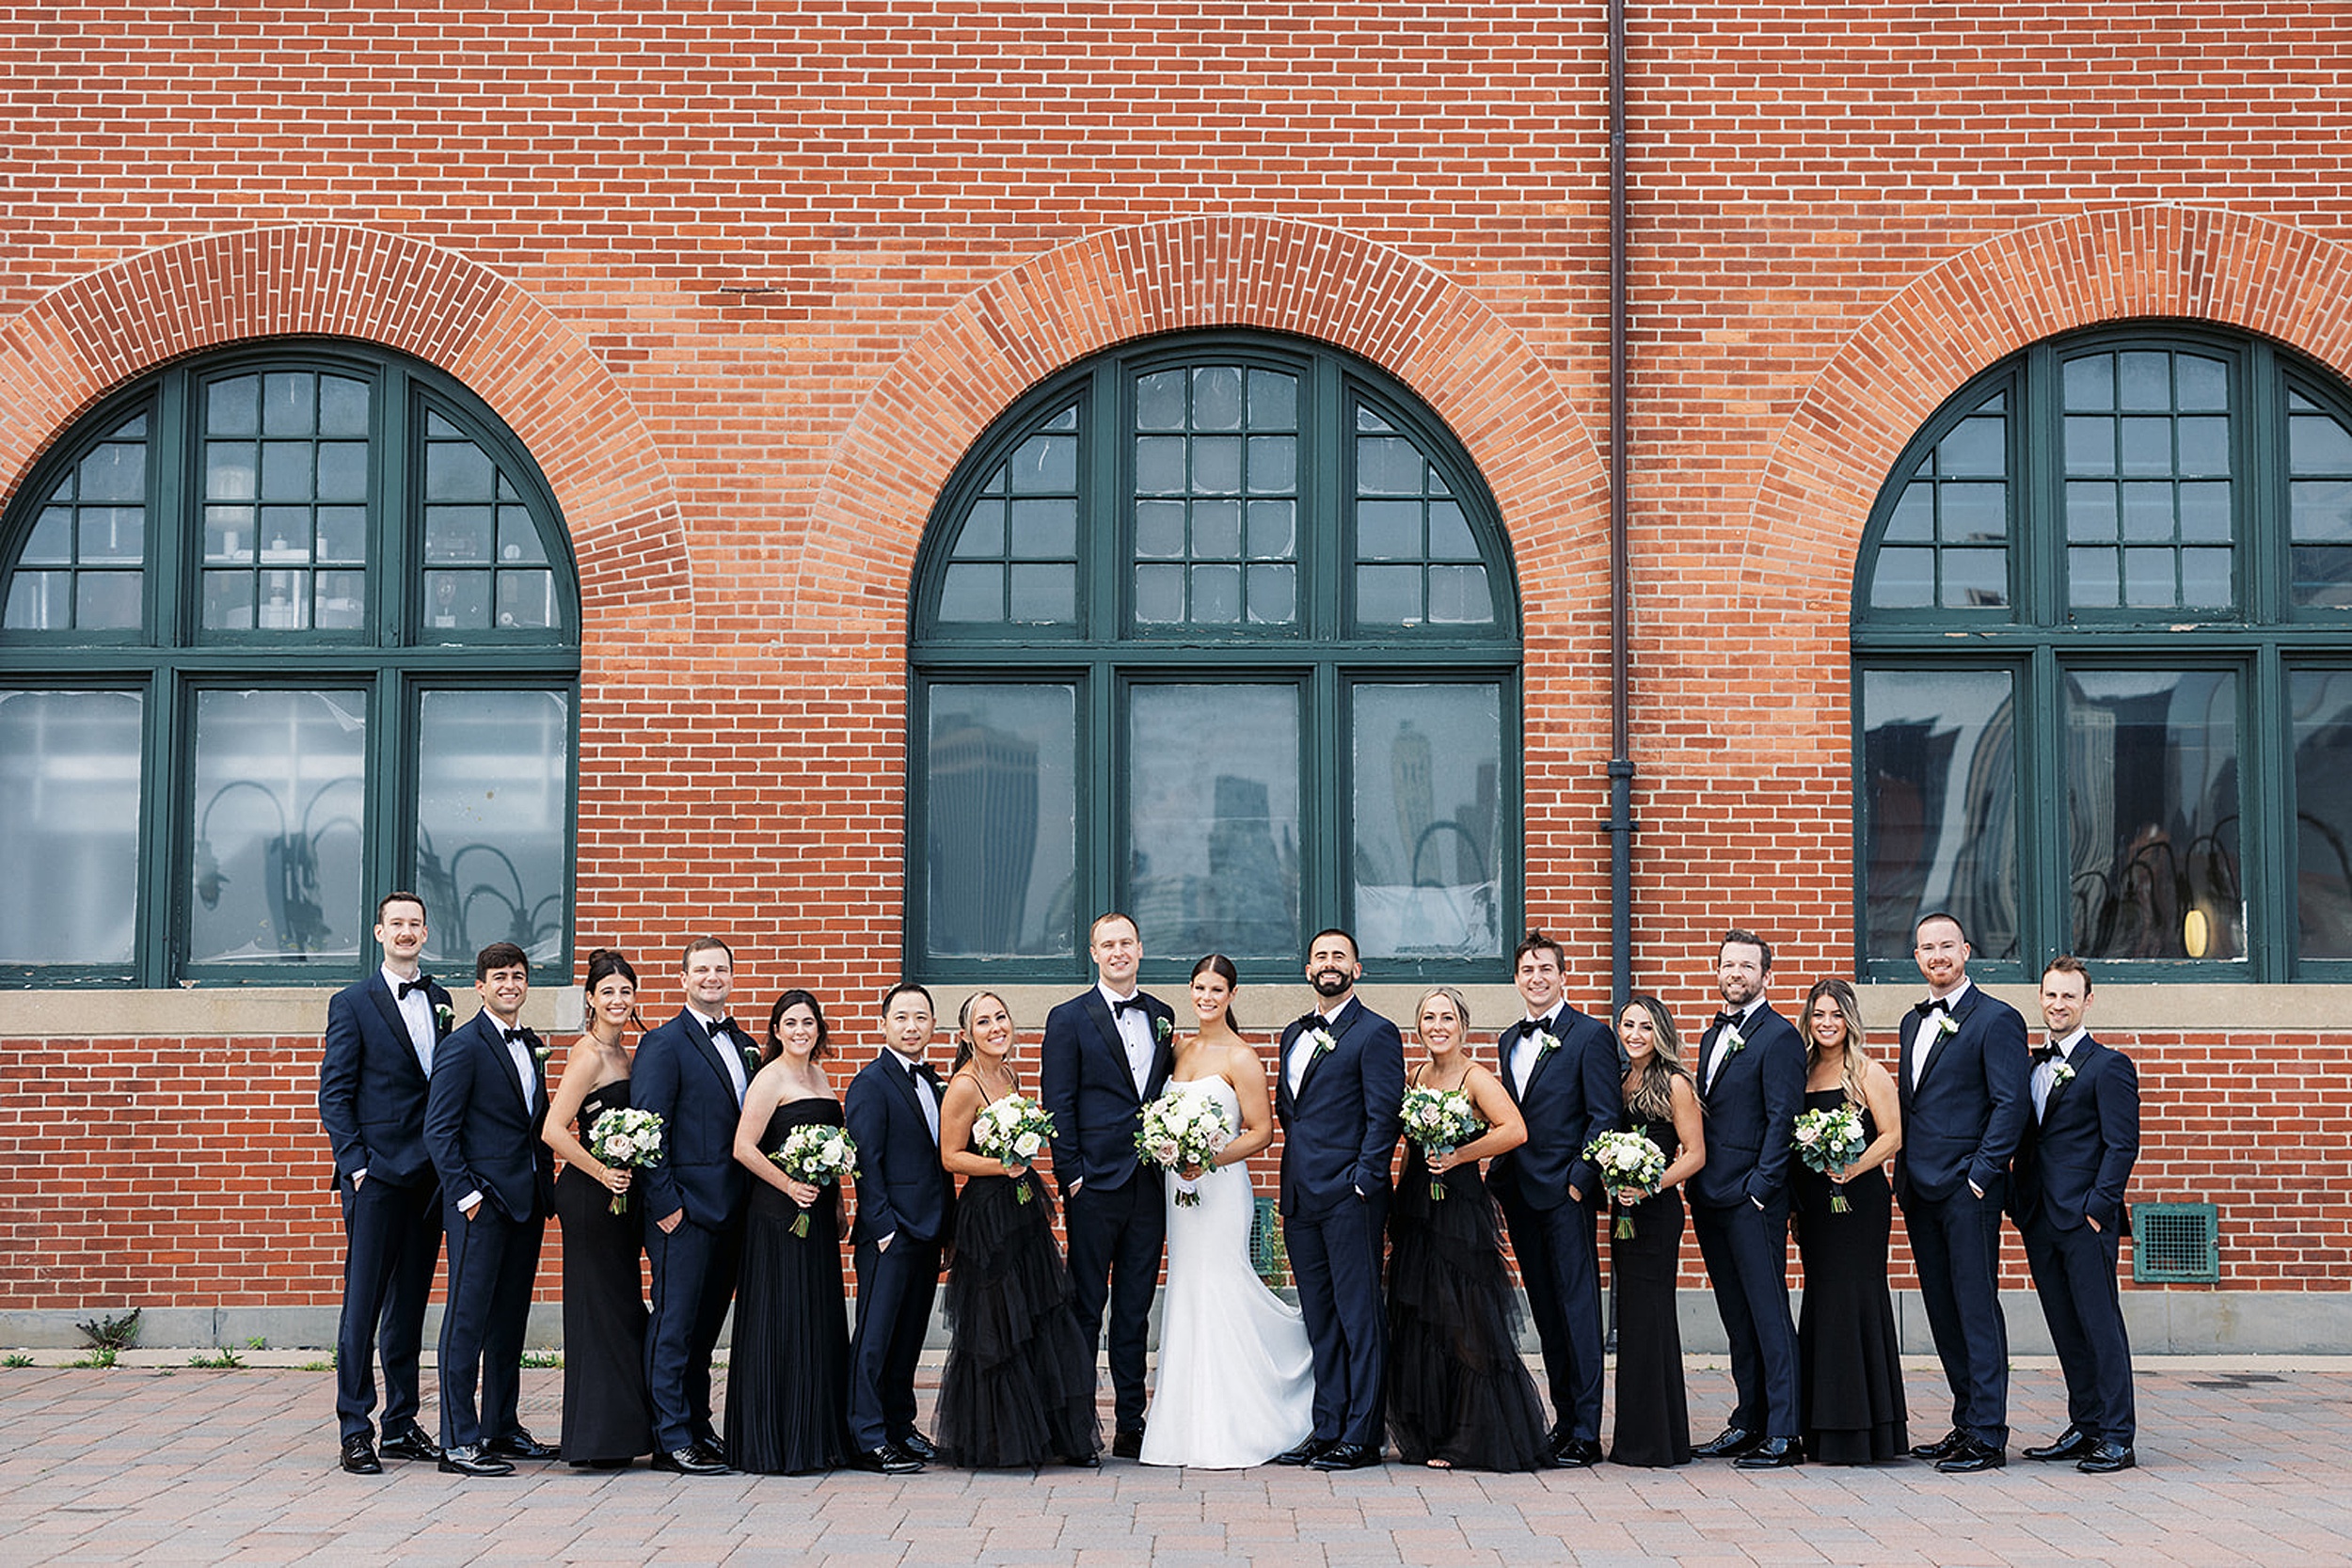 A bride and groom stand in the middle of their large wedding party by a brick building